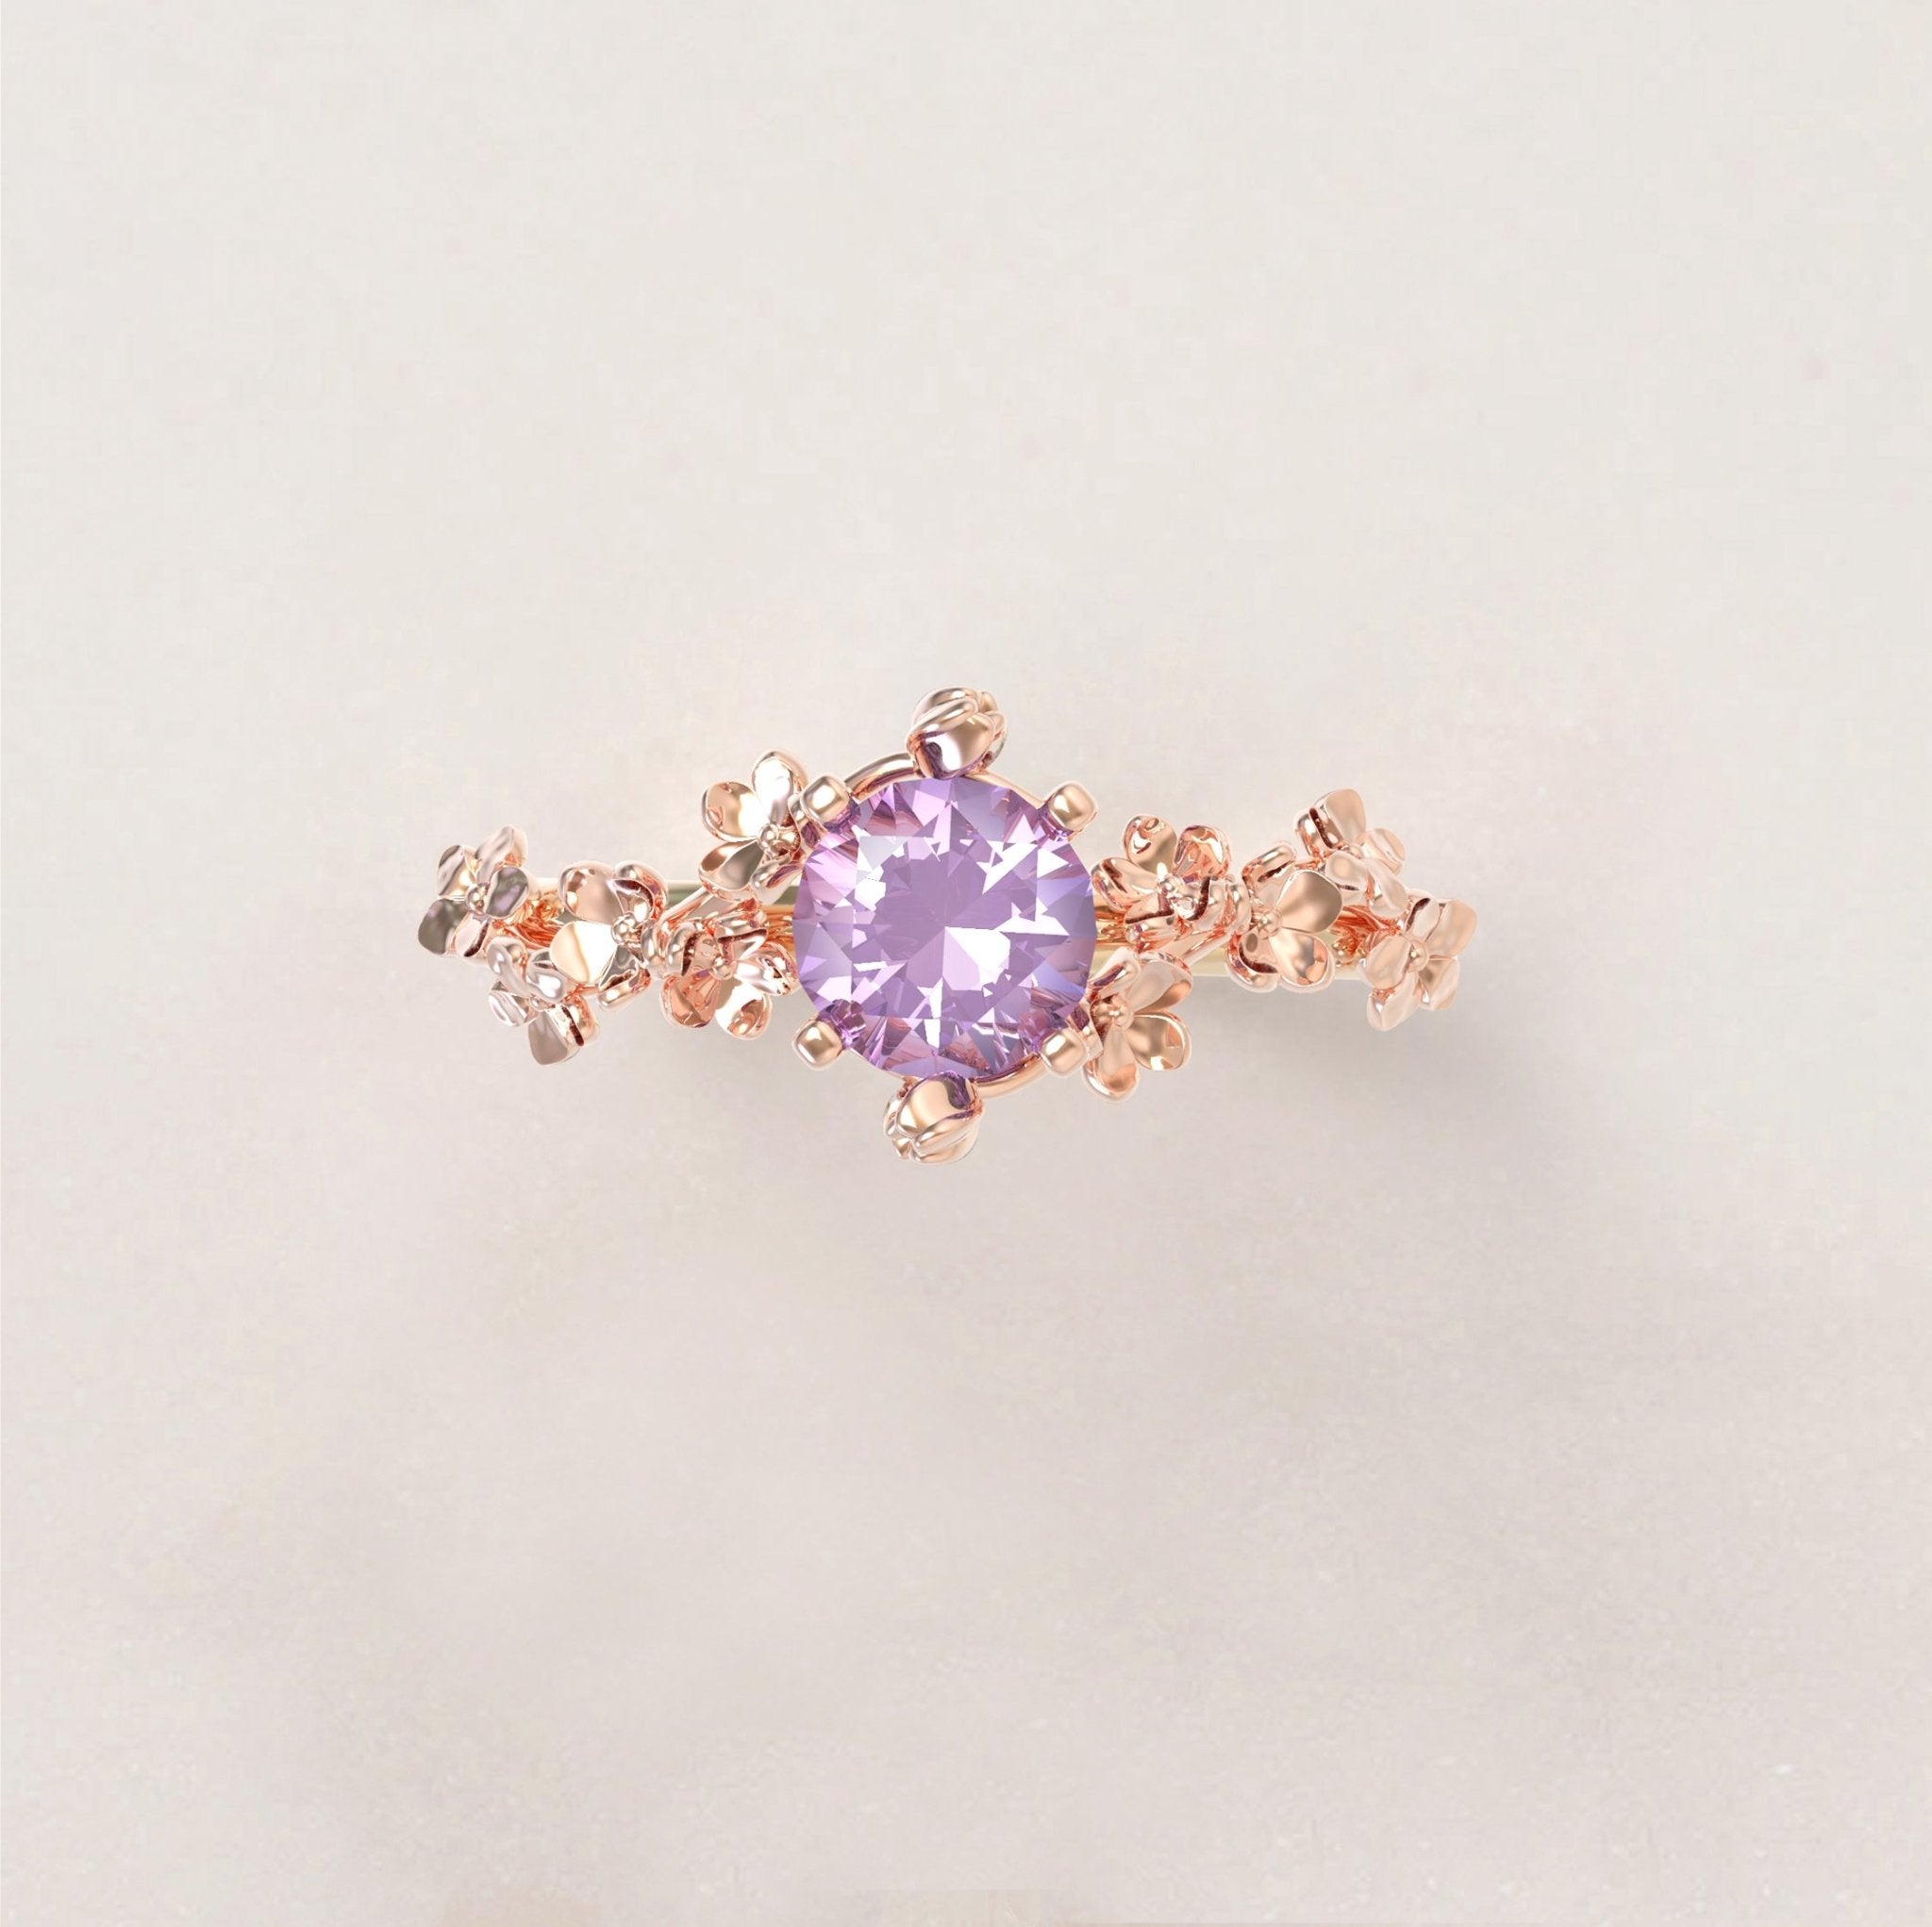 Unique Flowers Engagement Ring No.6 Version 2 in Yellow Band/Rose Flowers Gold - Amethyst - Roelavi